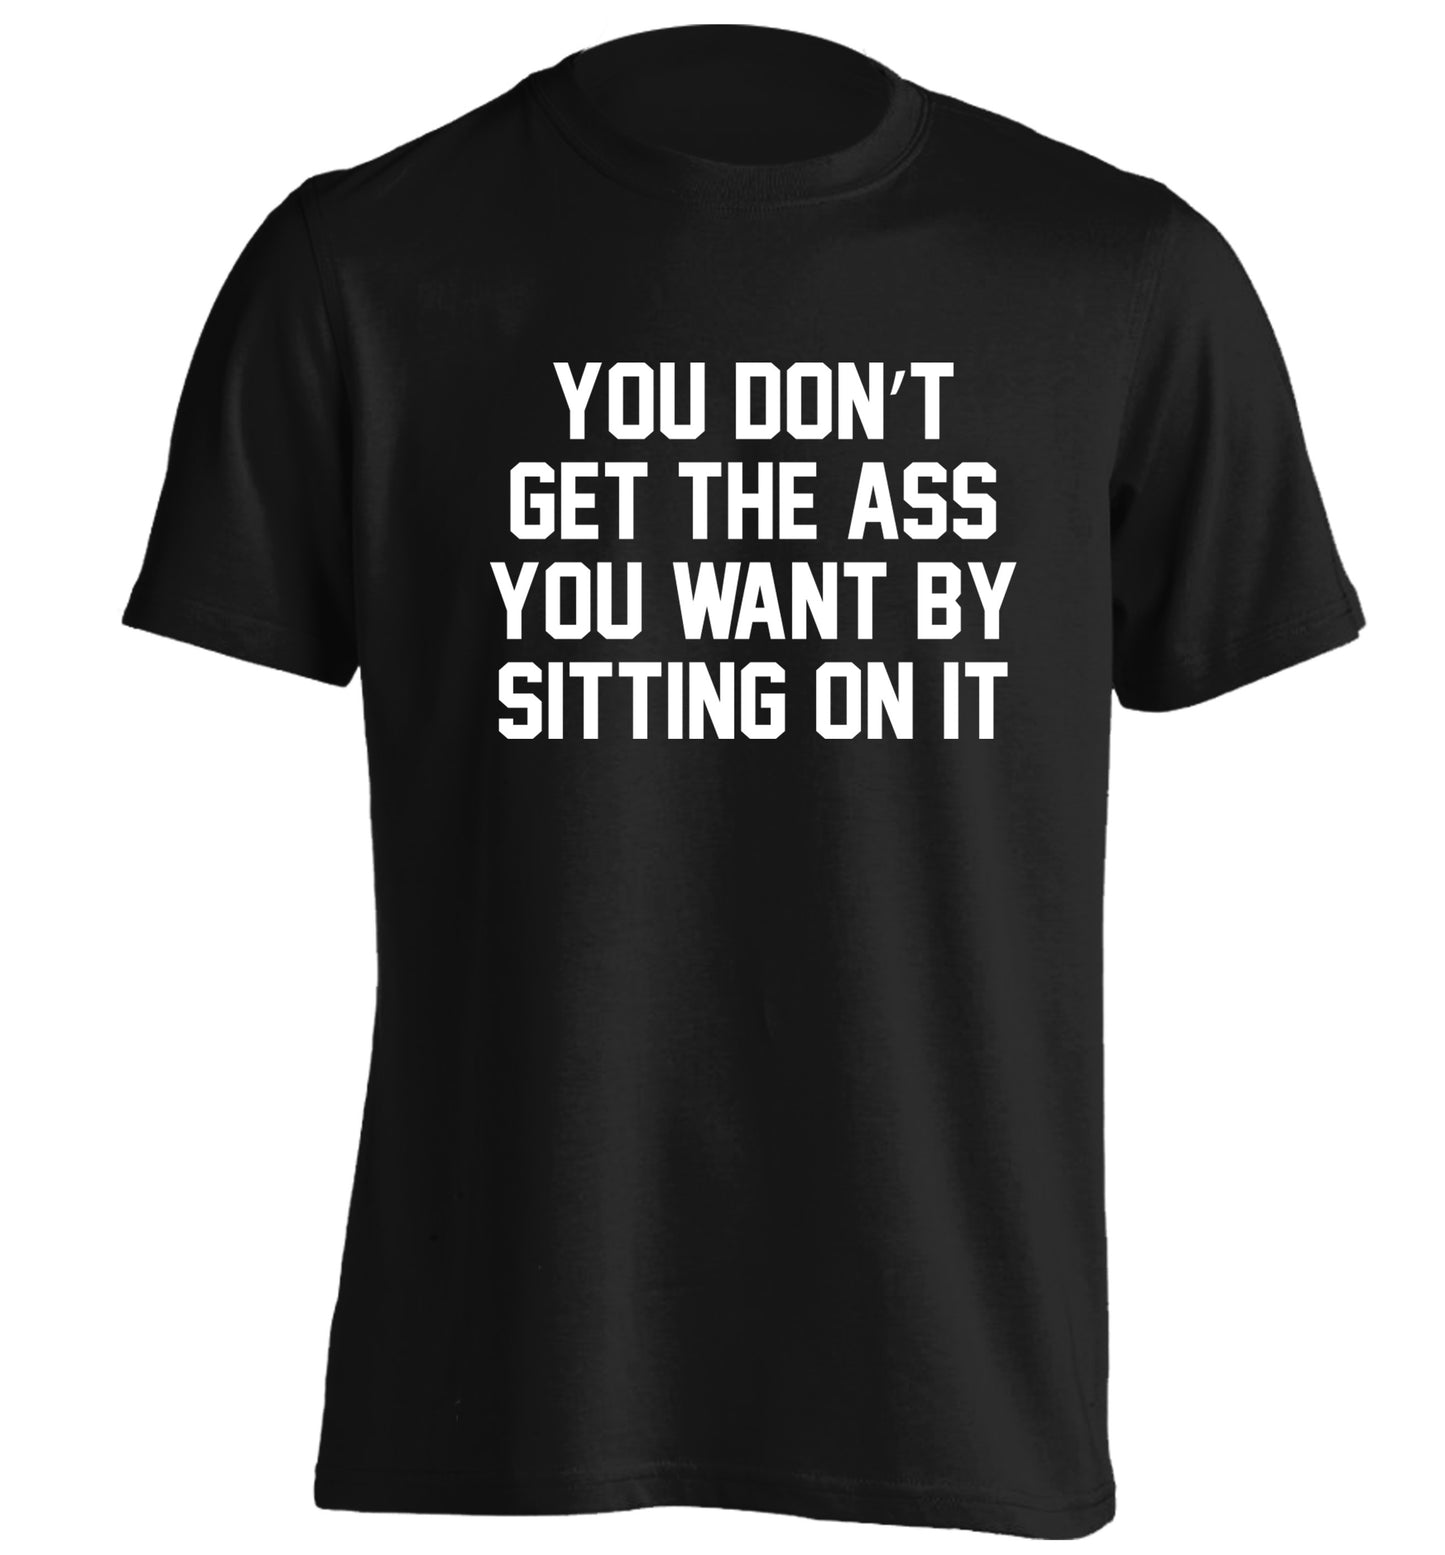 You don't get the ass you want by sitting on it adults unisex black Tshirt 2XL